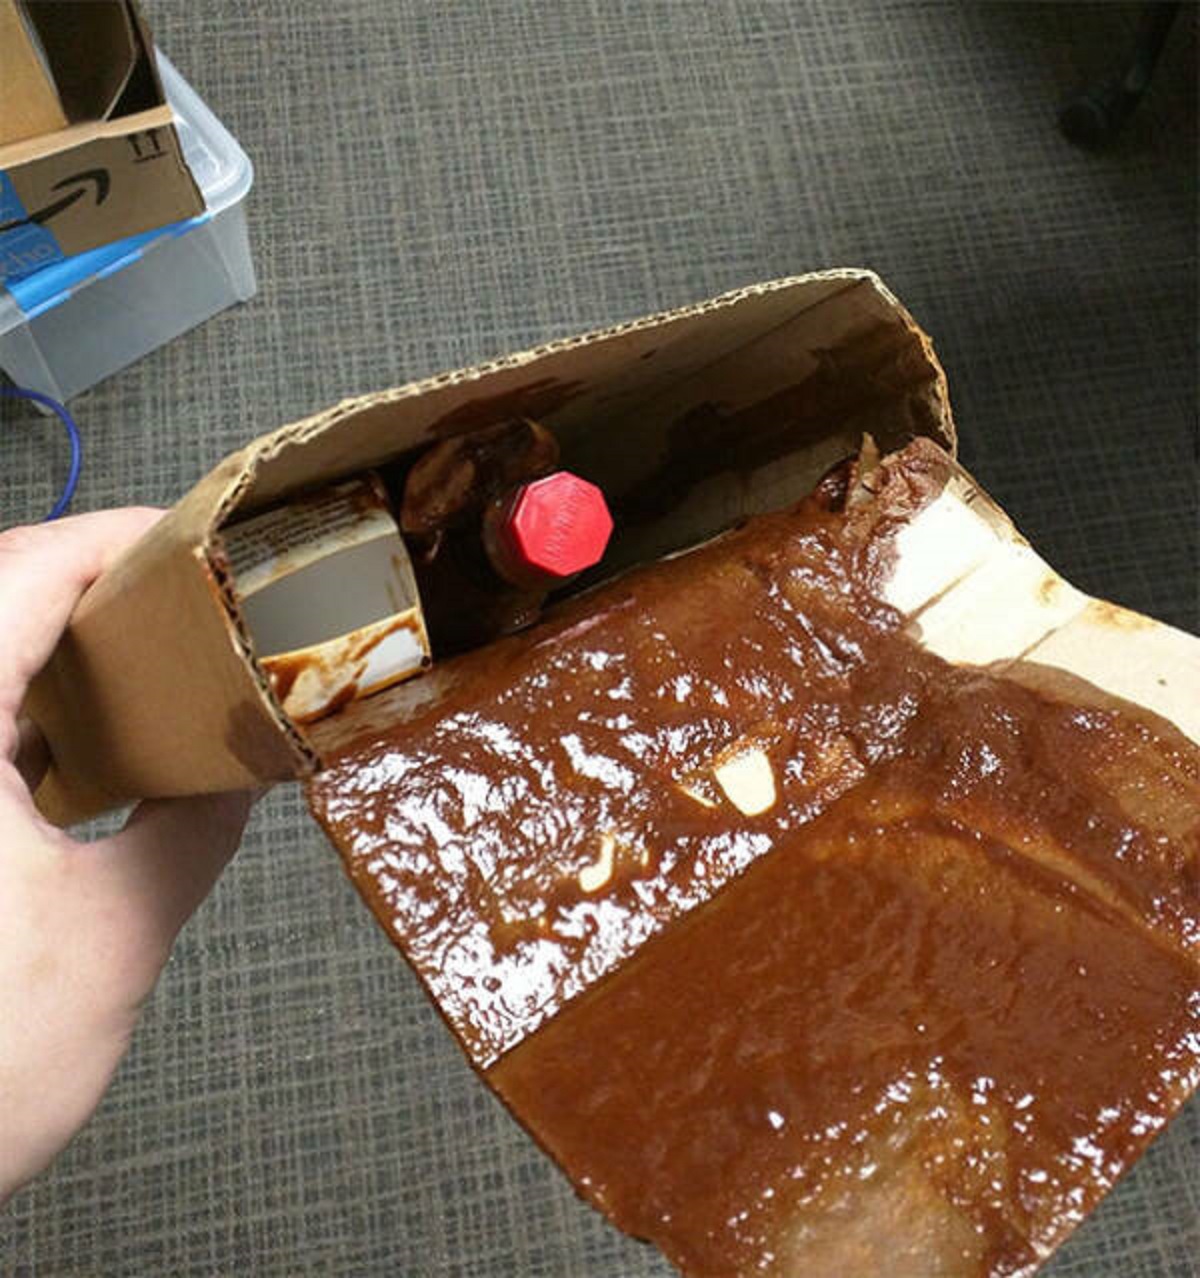 "When your hot sauce gets shipped without any protection."